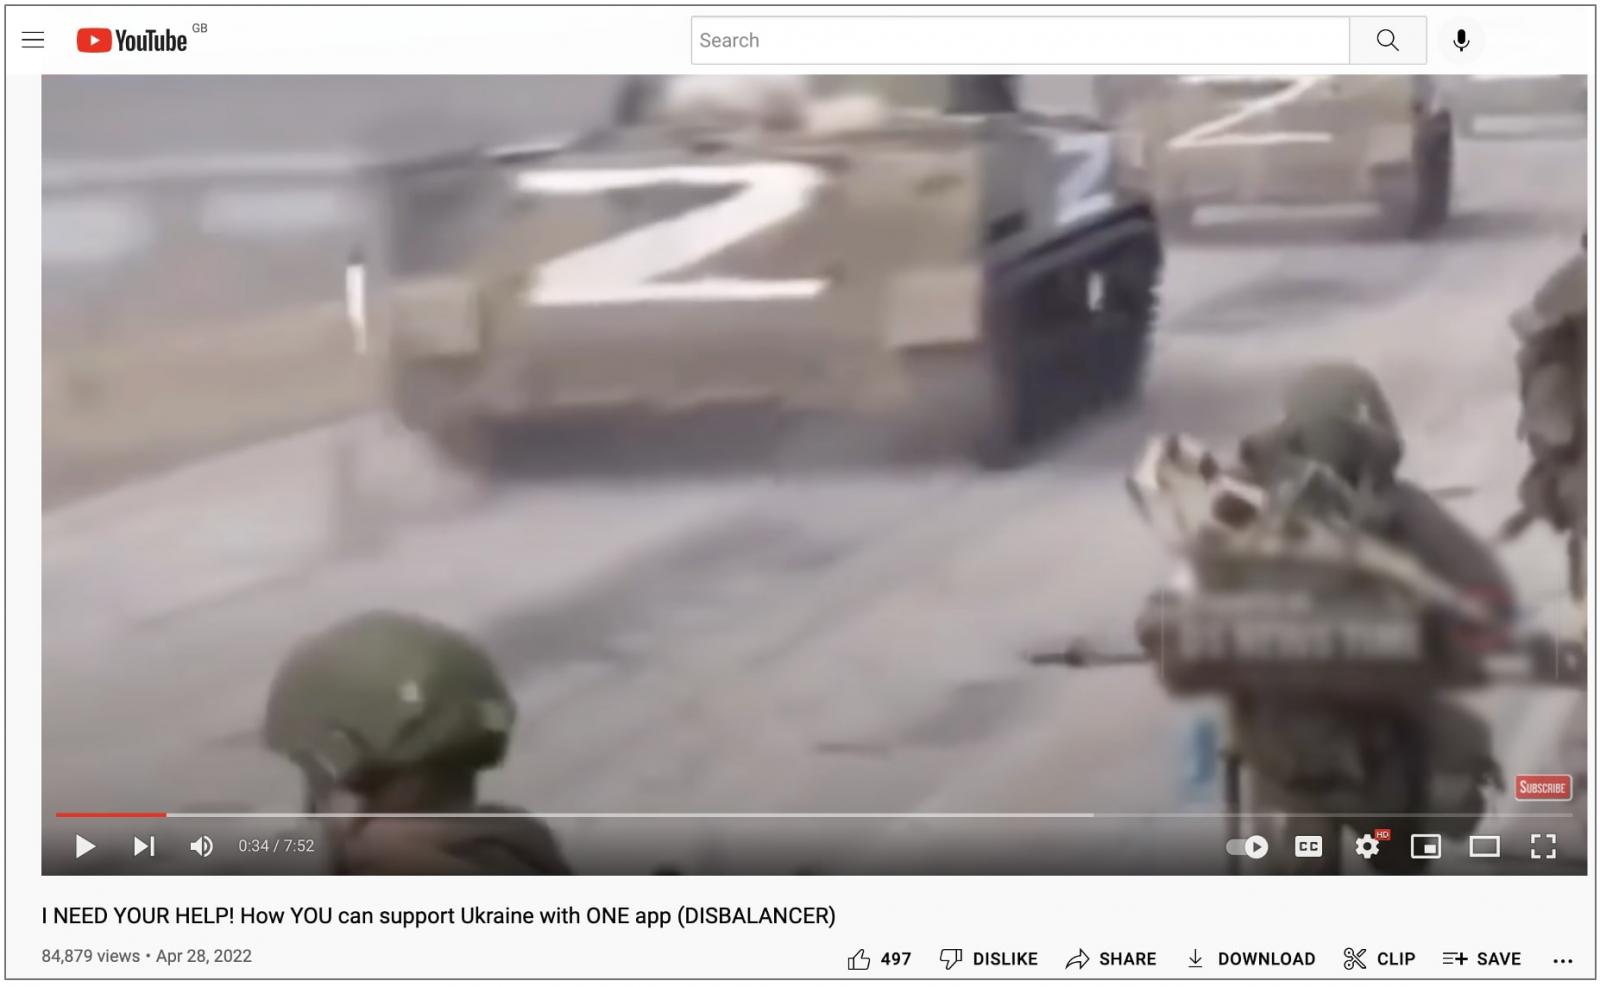 YouTube video promoting DDoS against Russia